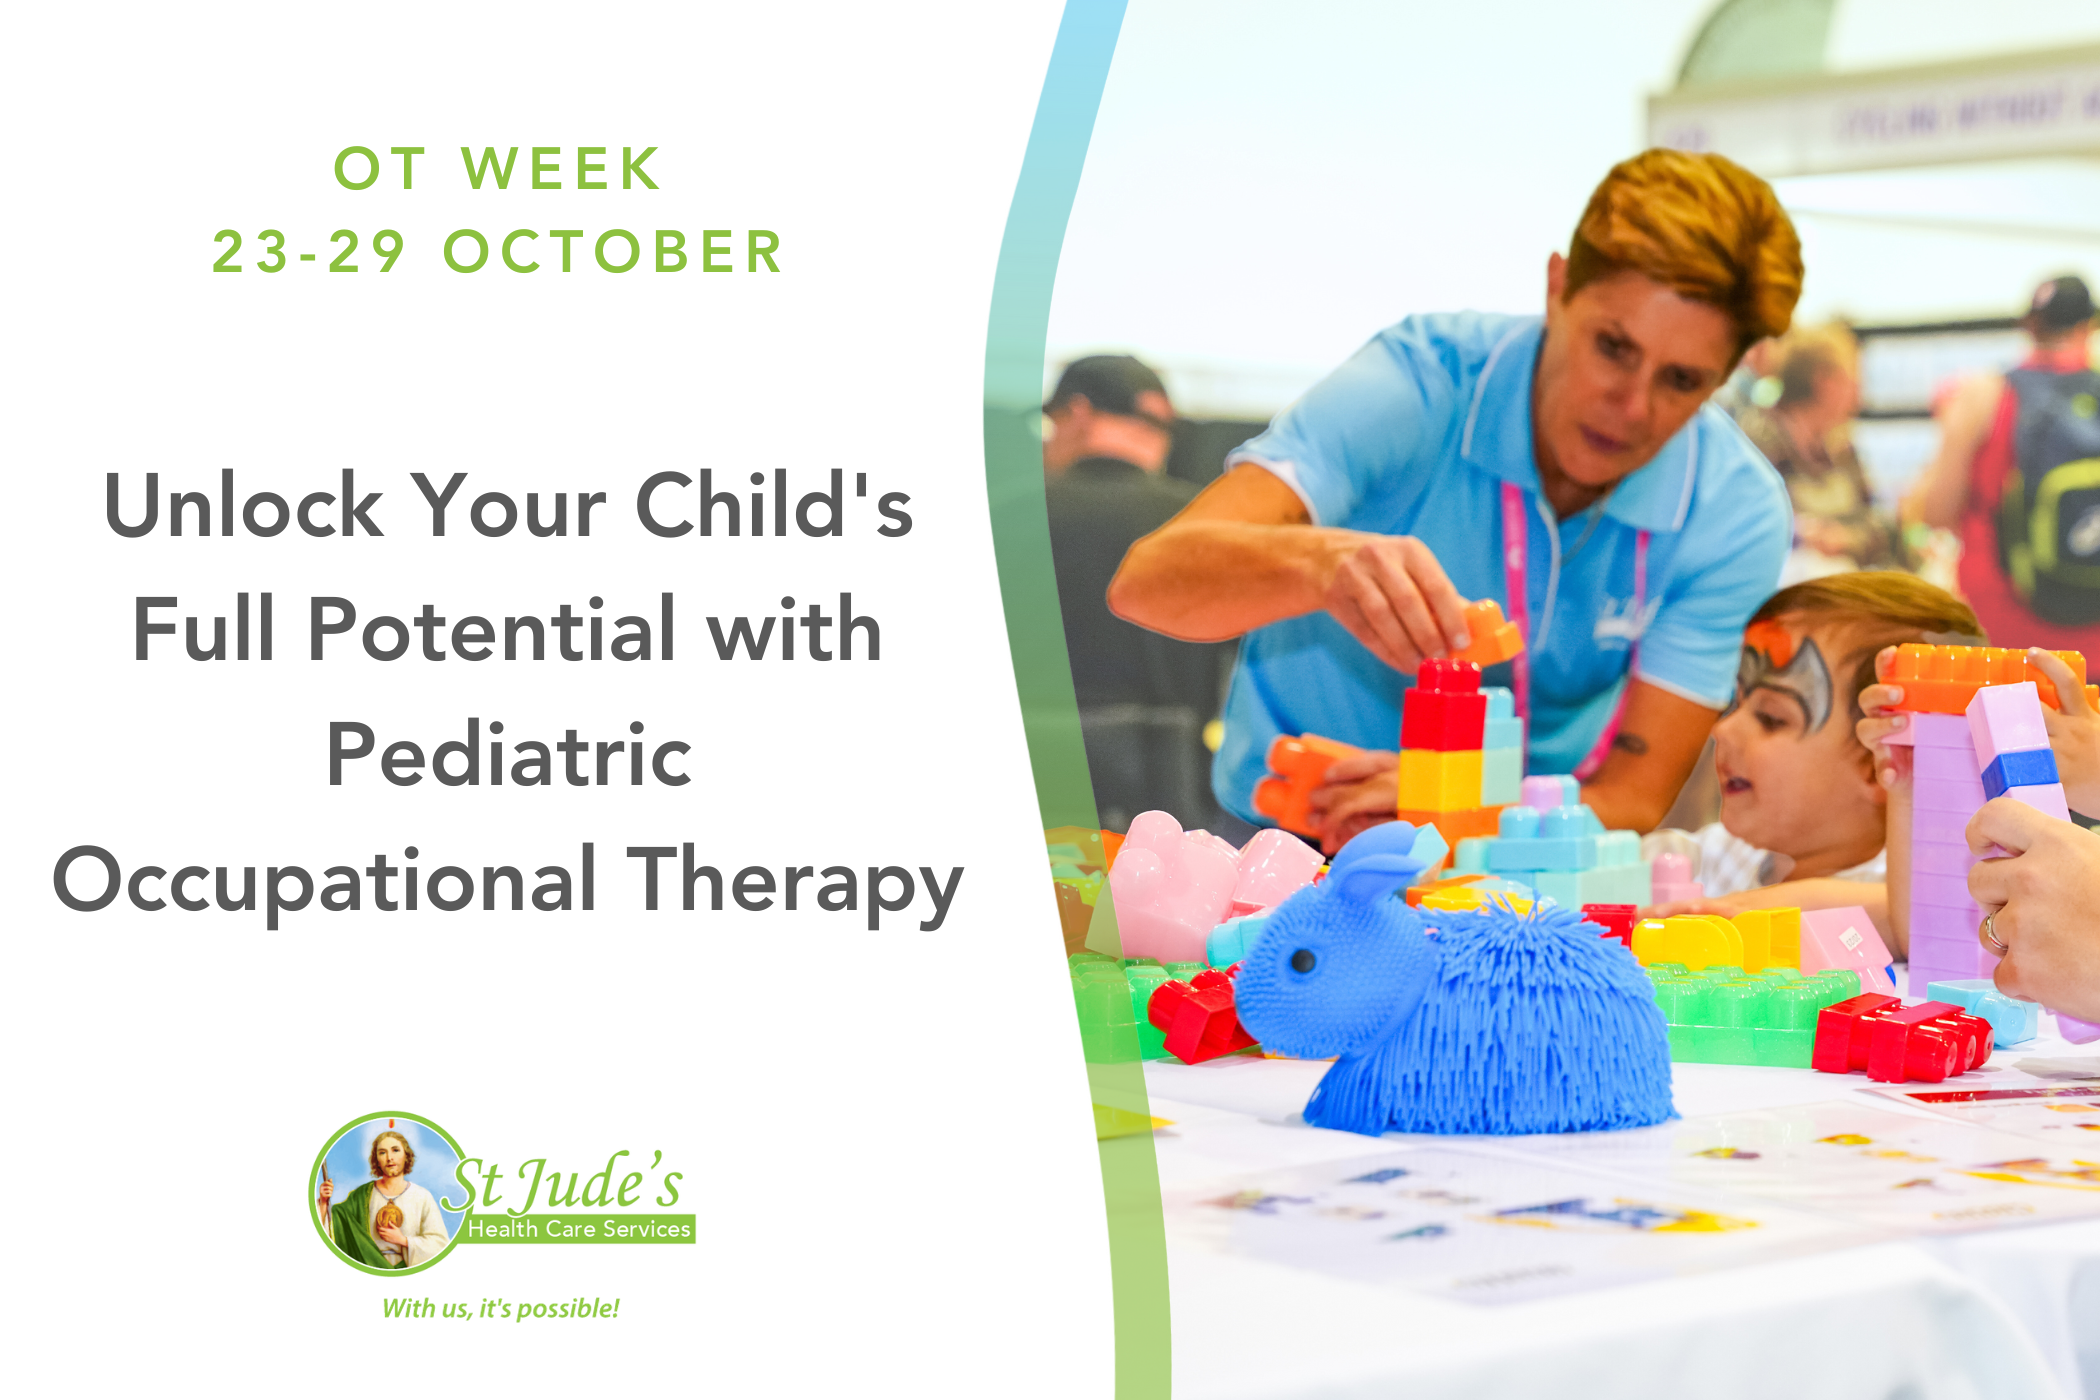 OT Week October 23-29. Unlock your child's full potential with Paediatric Occupational Therapy.